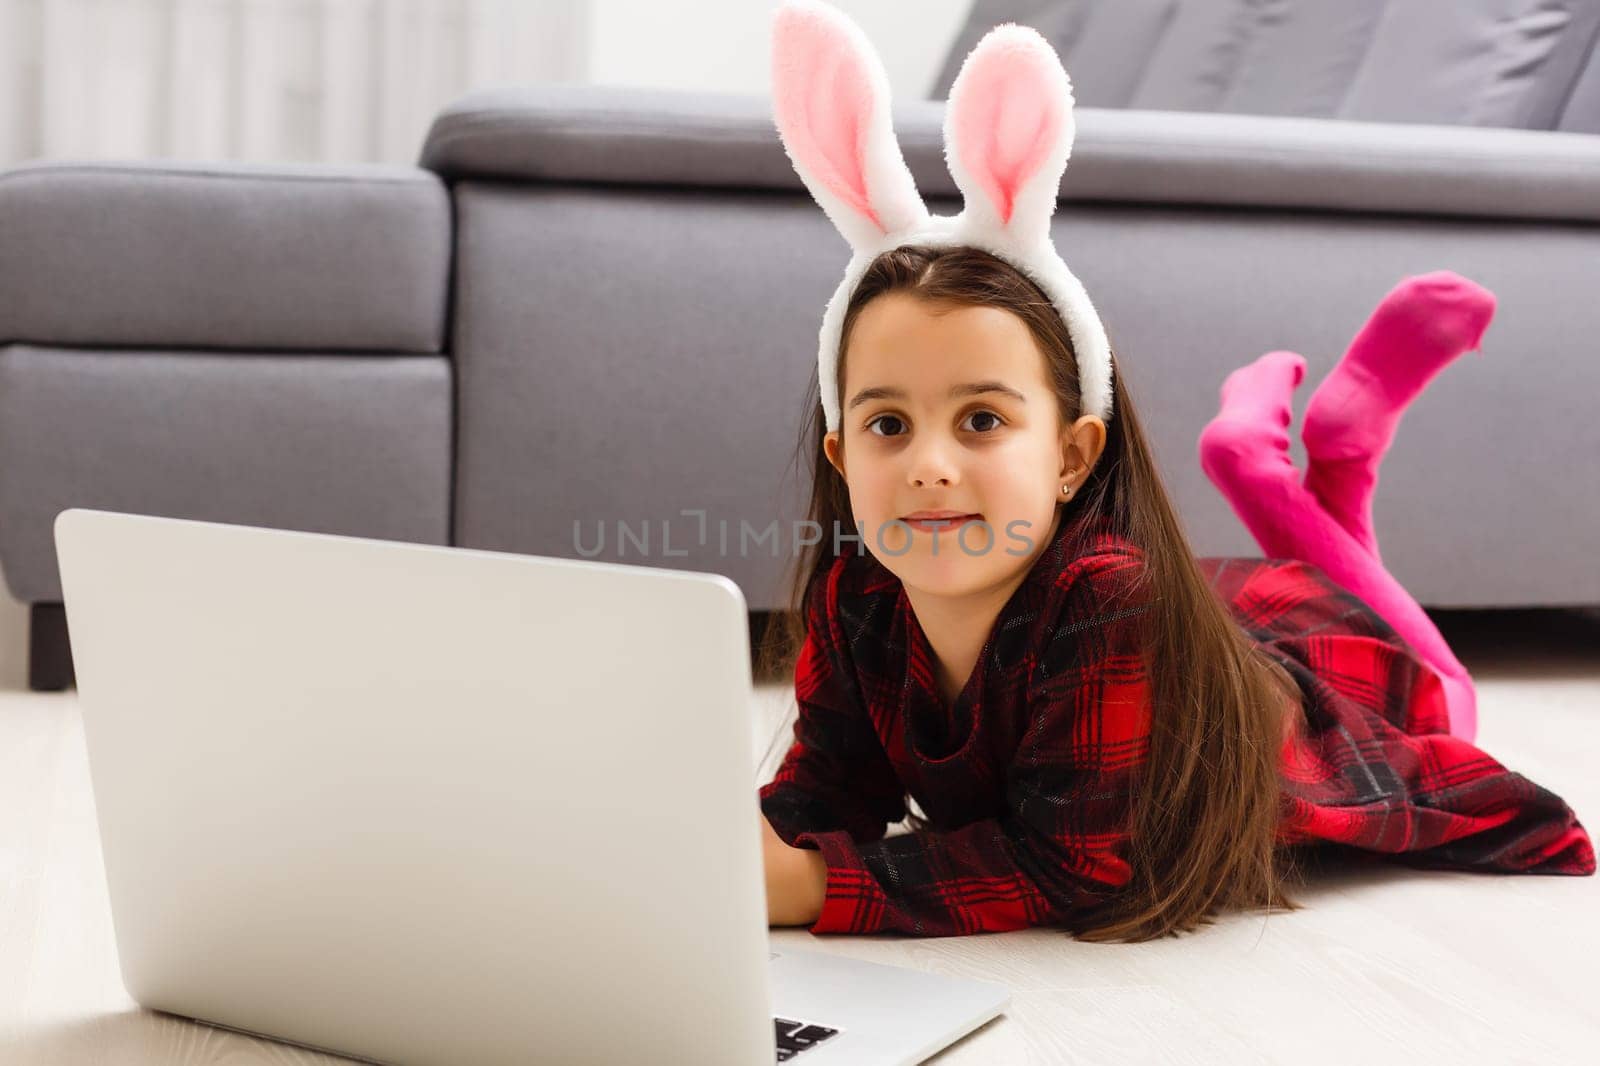 Little girl with her bunny using computer together preparing for easter-